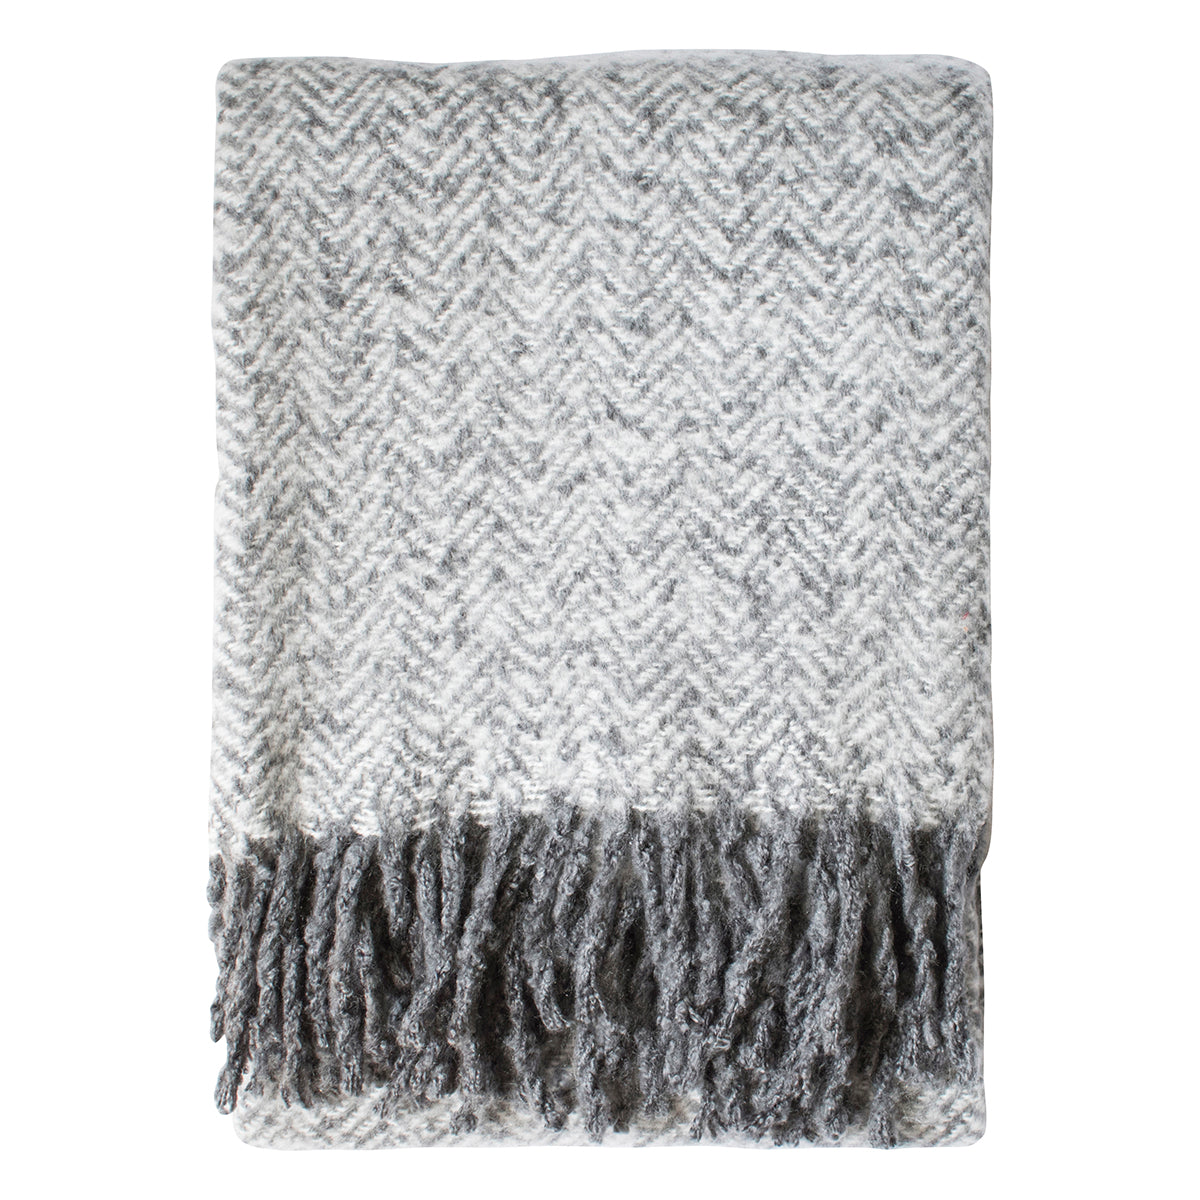 A stylish home accessory, a Grey and White Herringbone Faux Mohair Throw with Fringes by Kikiathome.co.uk enhances interior decor.